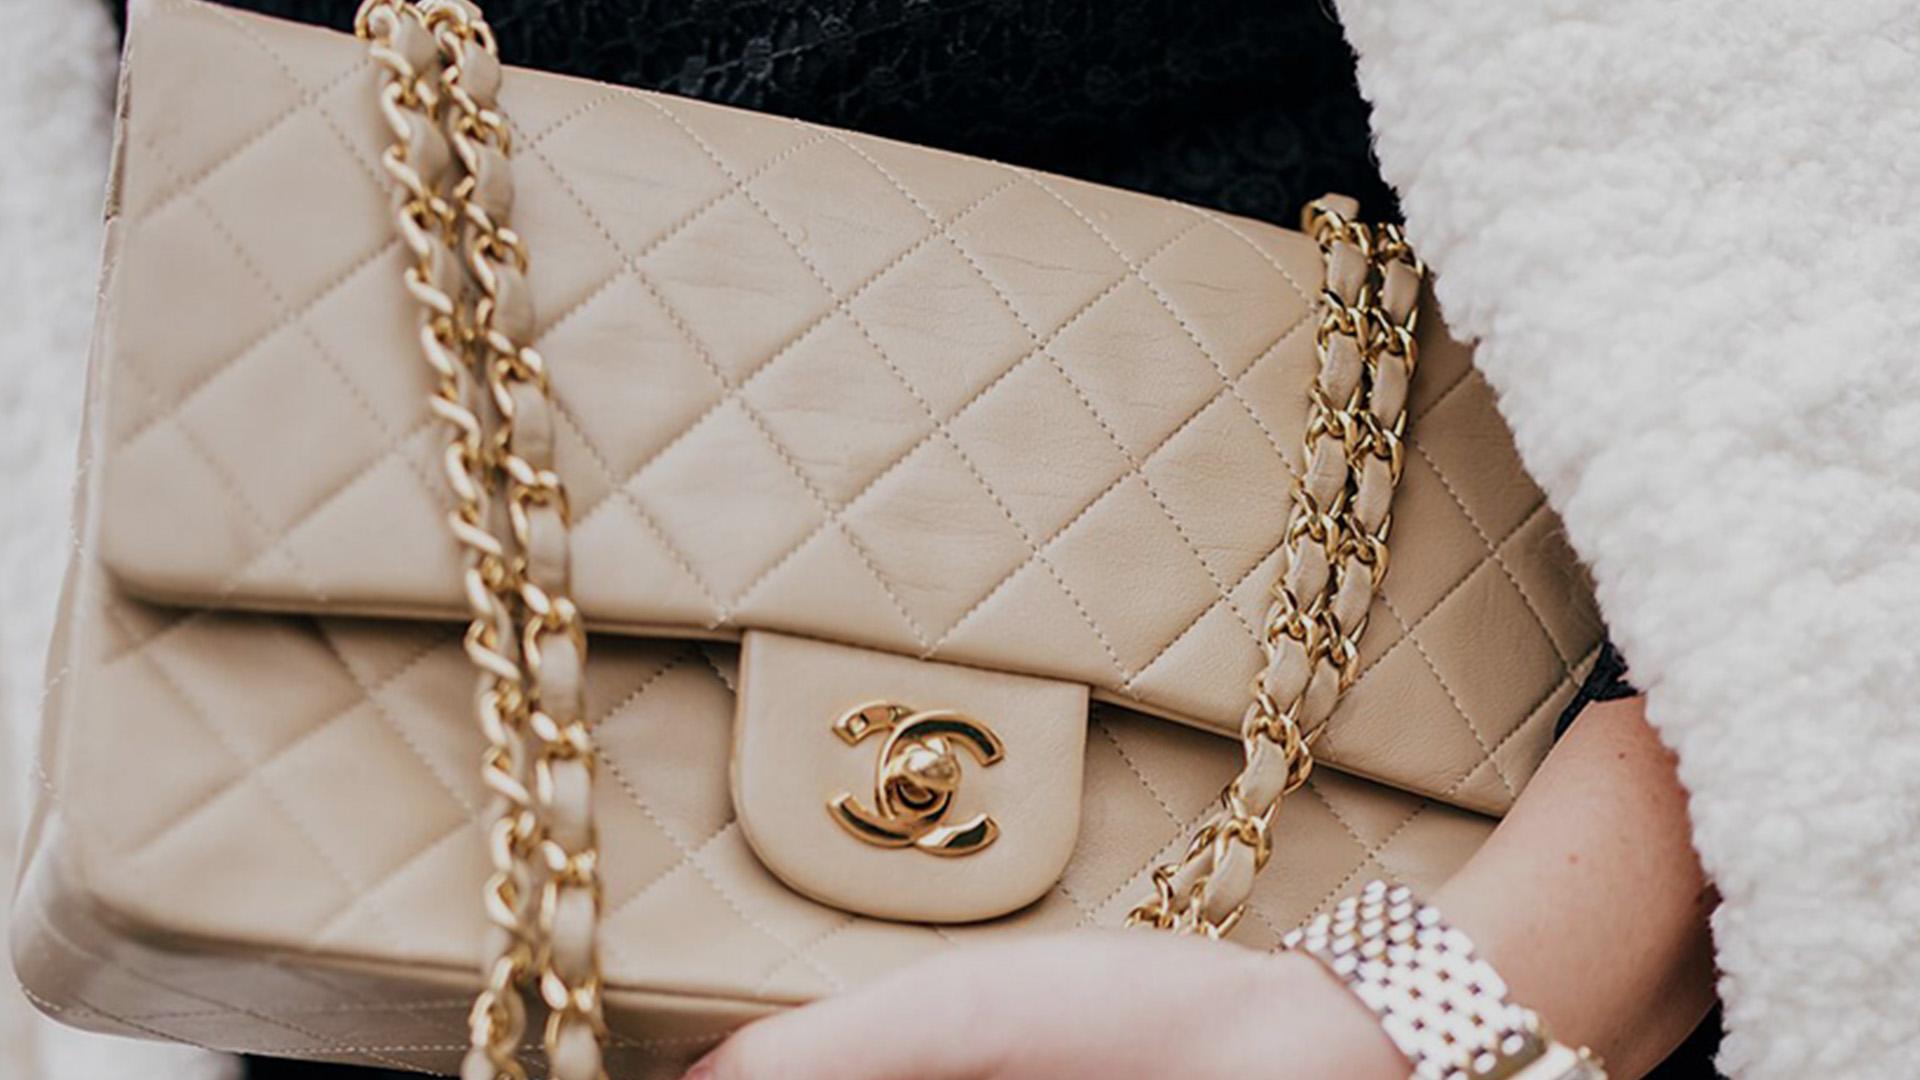 chanel classic beige small flap